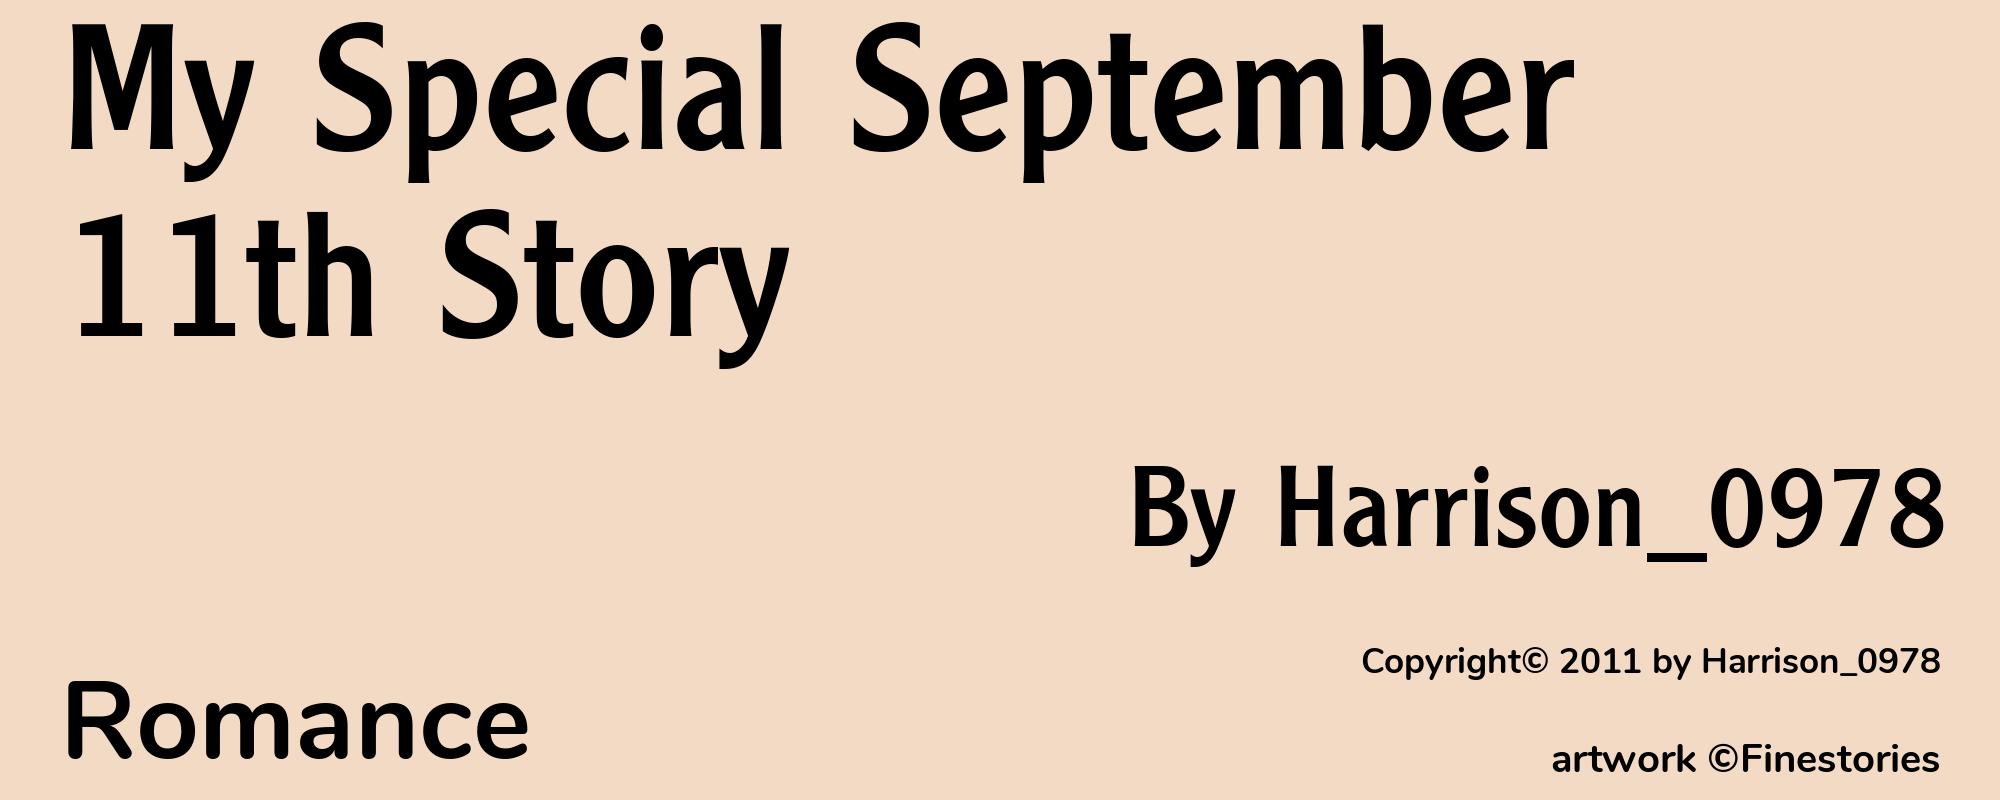 My Special September 11th Story - Cover